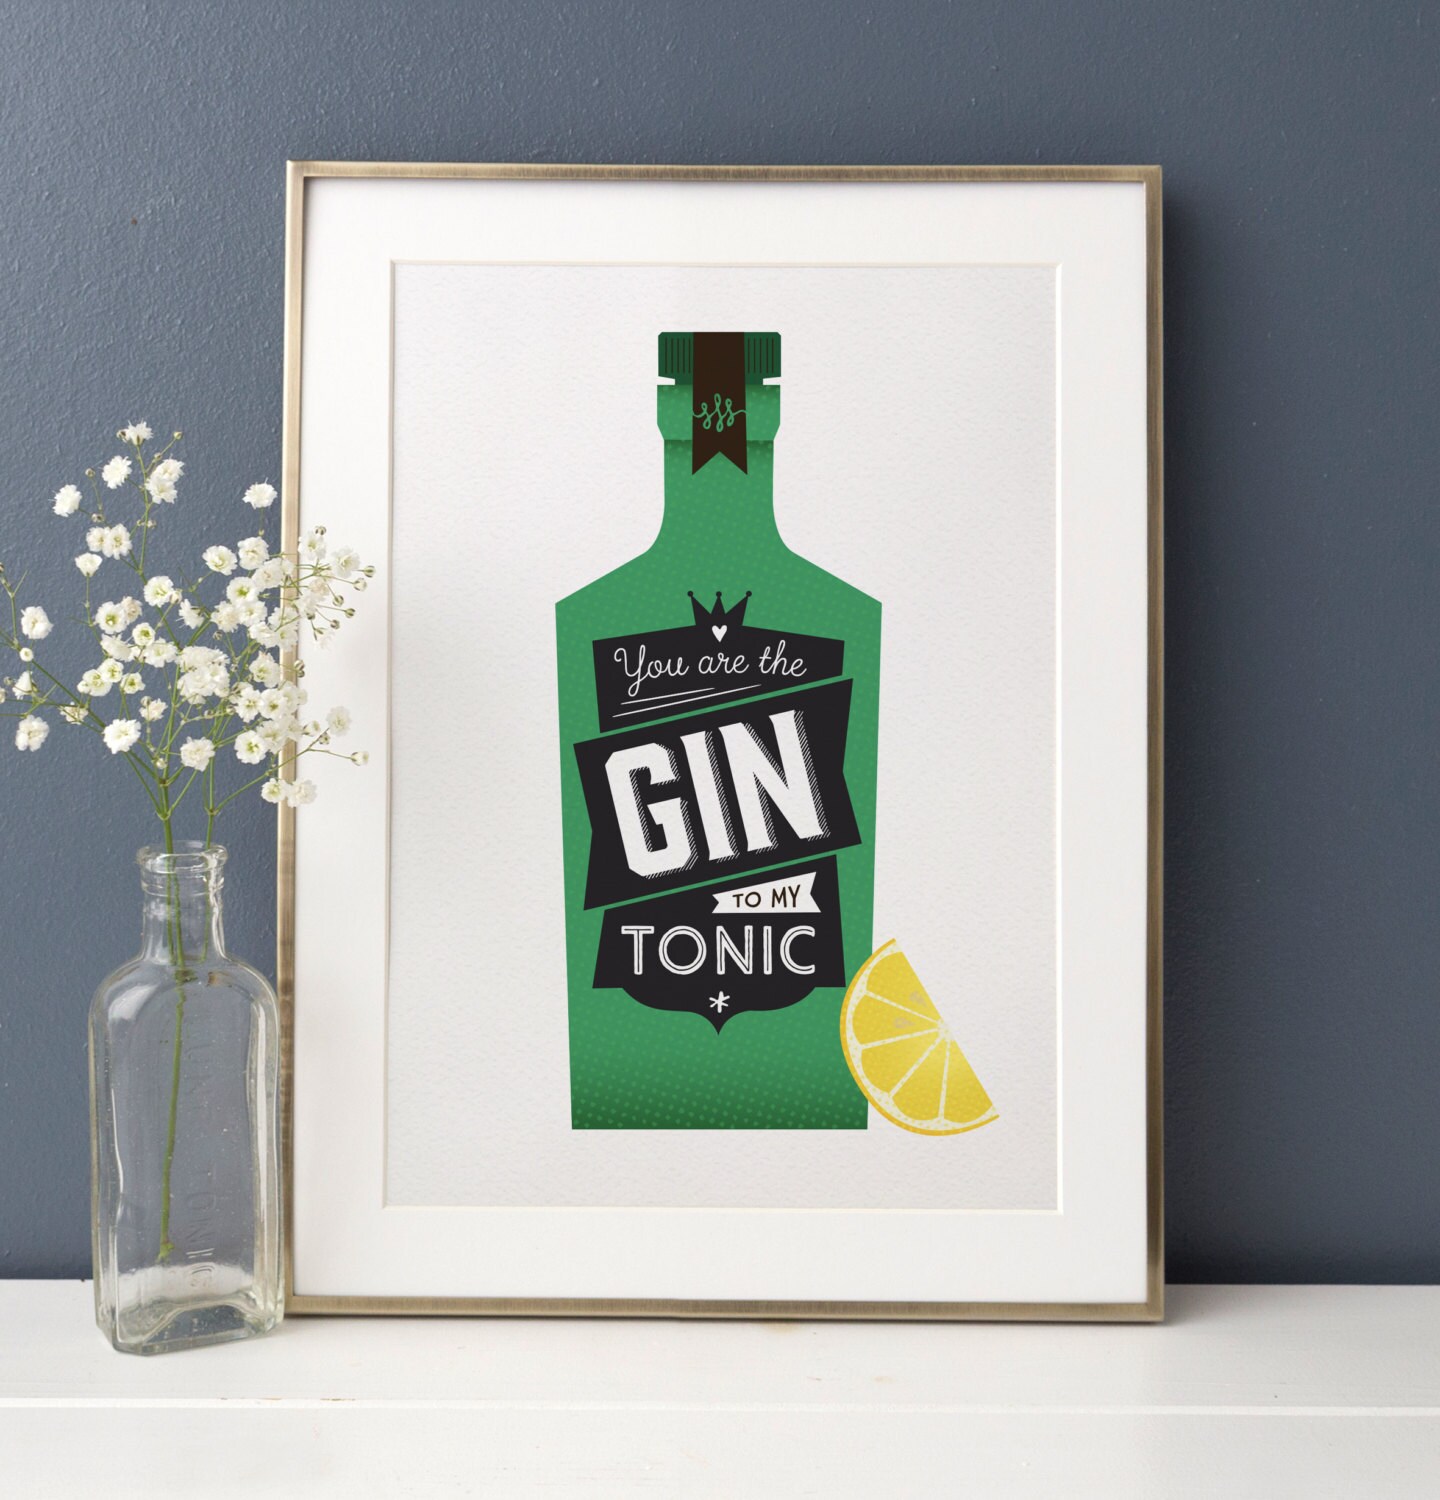 Gin & Tonic Print, Cocktail Poster, Retro Kitchen Print, You Are the Gin to  My Tonic, Vintage Design, Anniversary Gift, Gin Gift for Her - Etsy